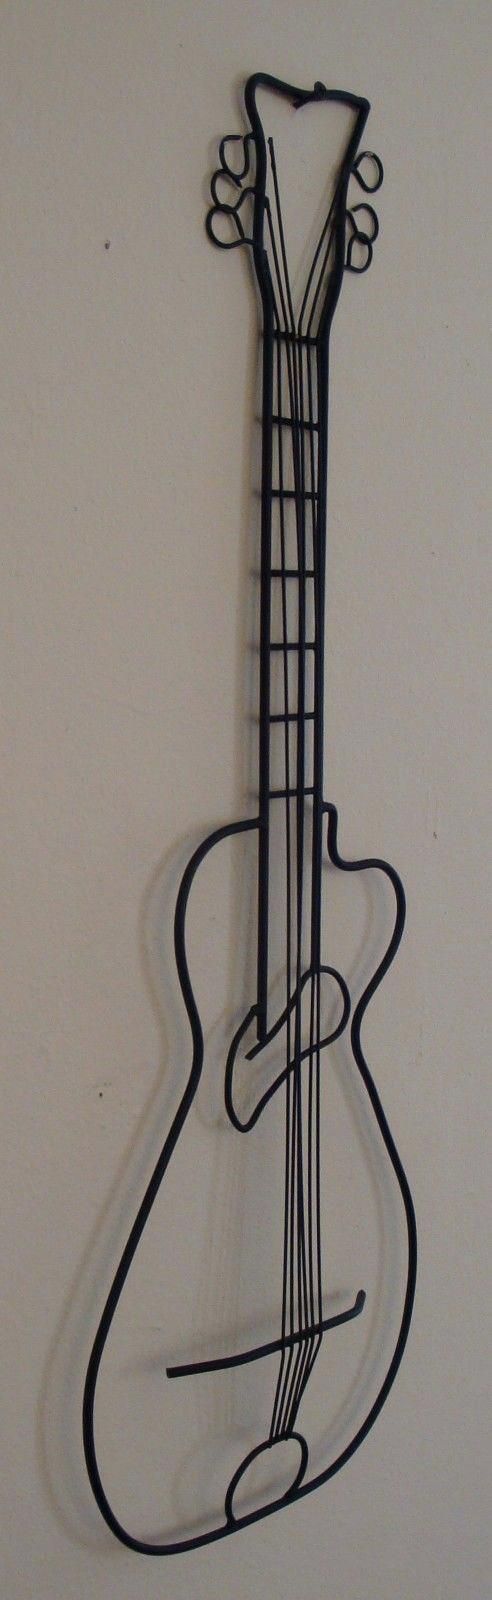 Wall Ideas : Music Wall Art Stickers Uk Hanging Music Notes Wall Intended For Metal Music Notes Wall Art (Photo 18 of 20)